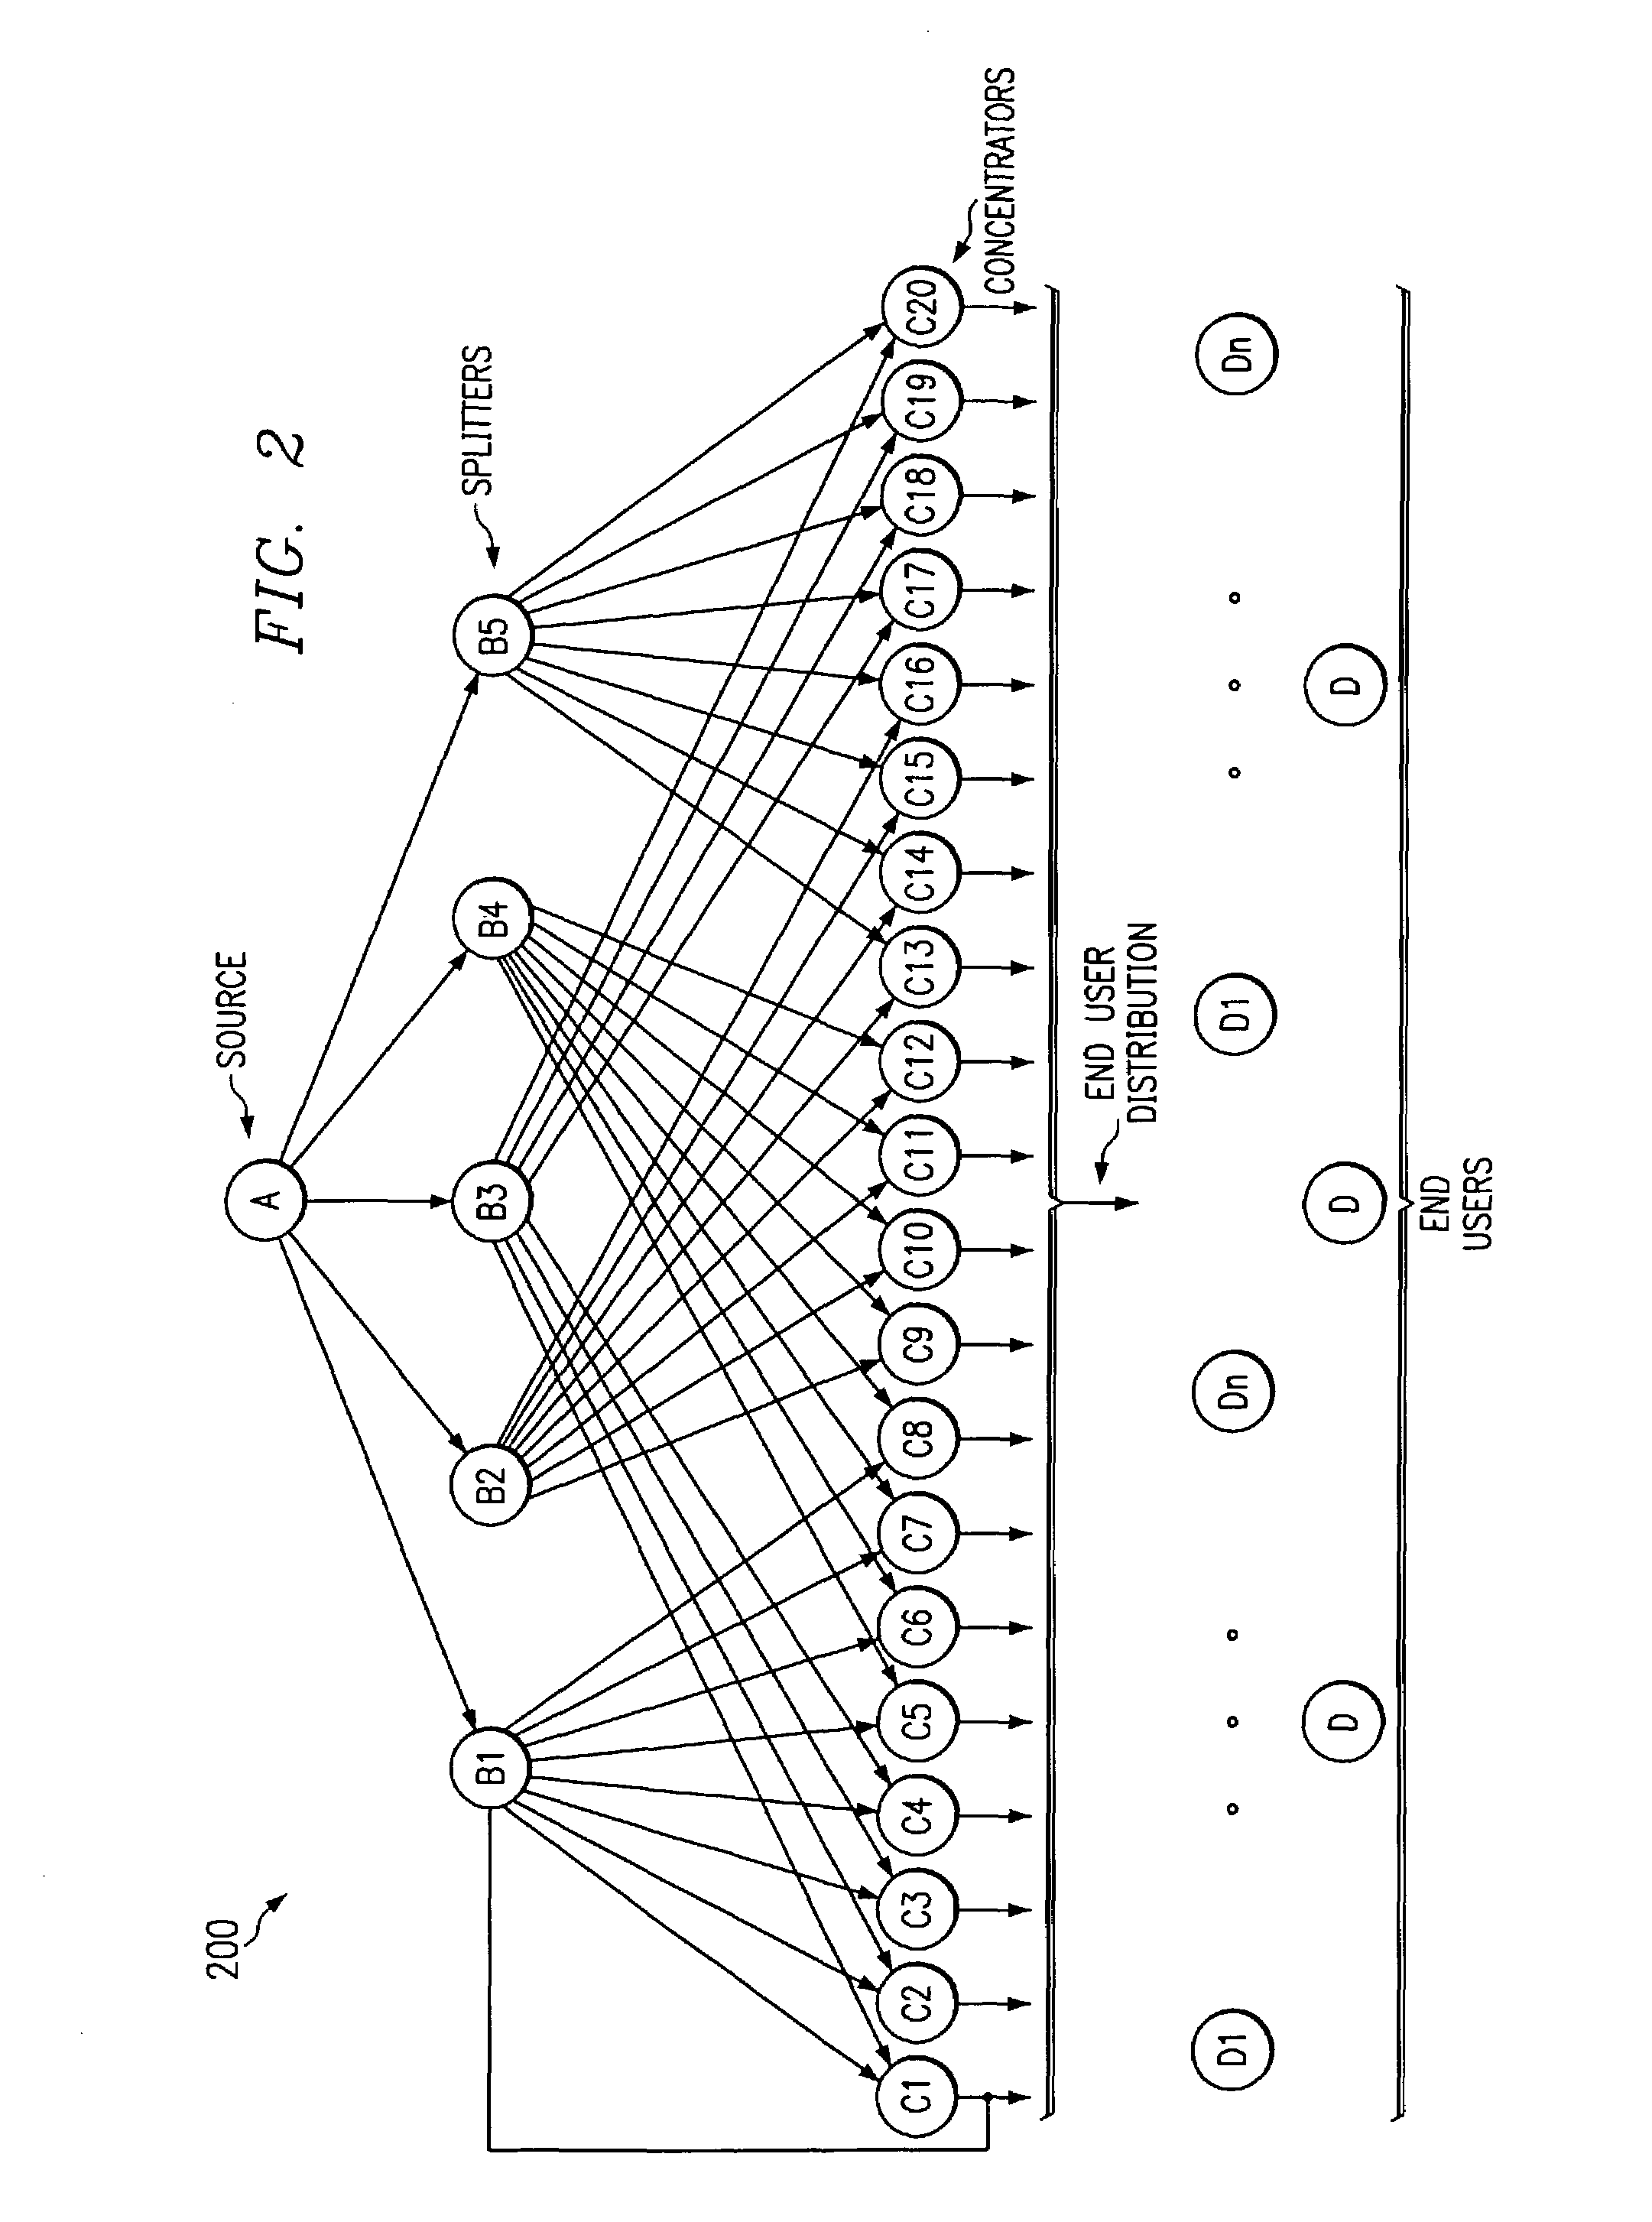 Method and system for fault tolerant media streaming over the internet